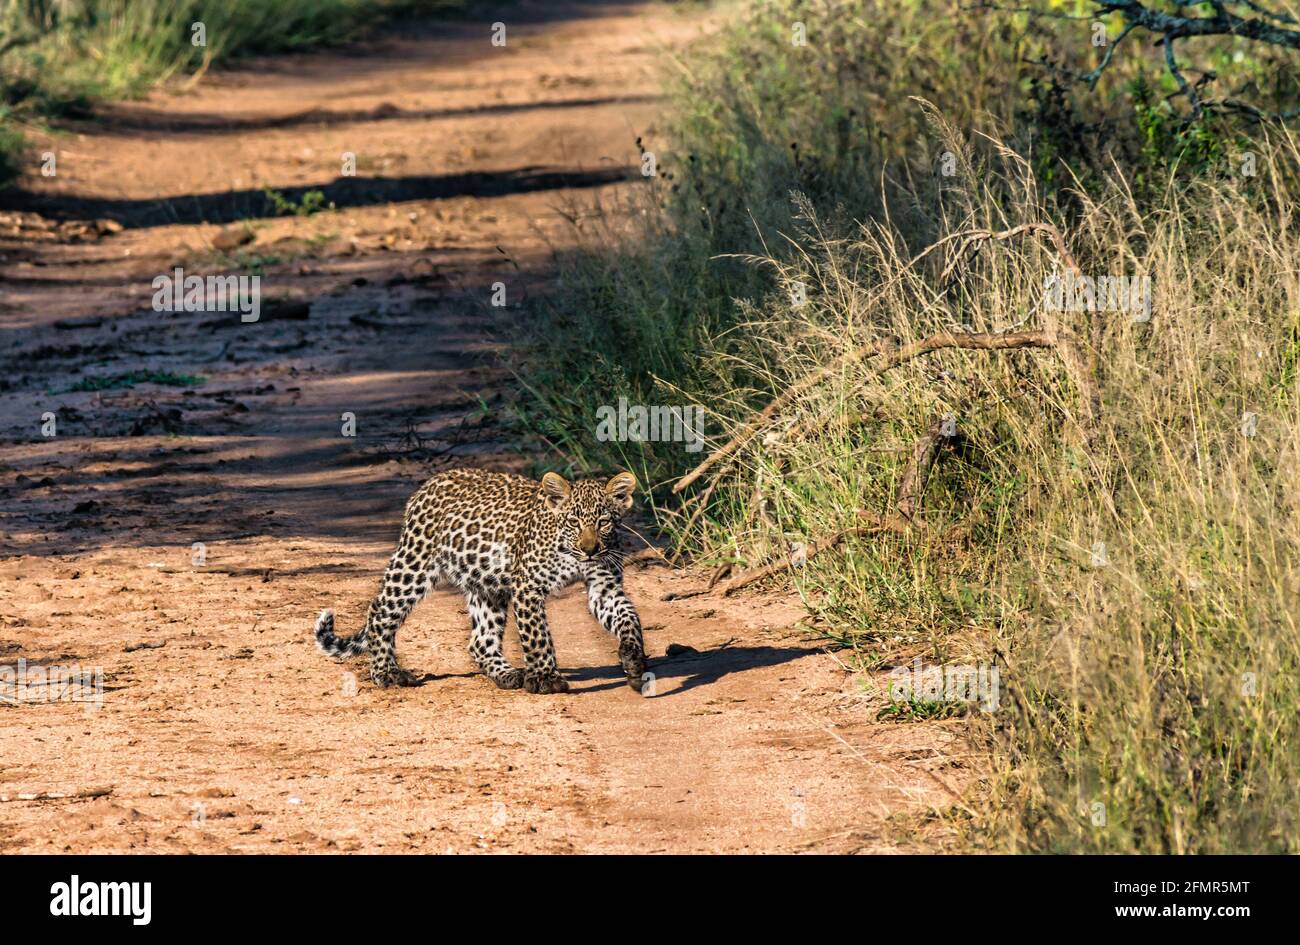 Leopard cub (Panthera pardus) walking on dirt track, Greater Kruger National Park, South Africa Stock Photo